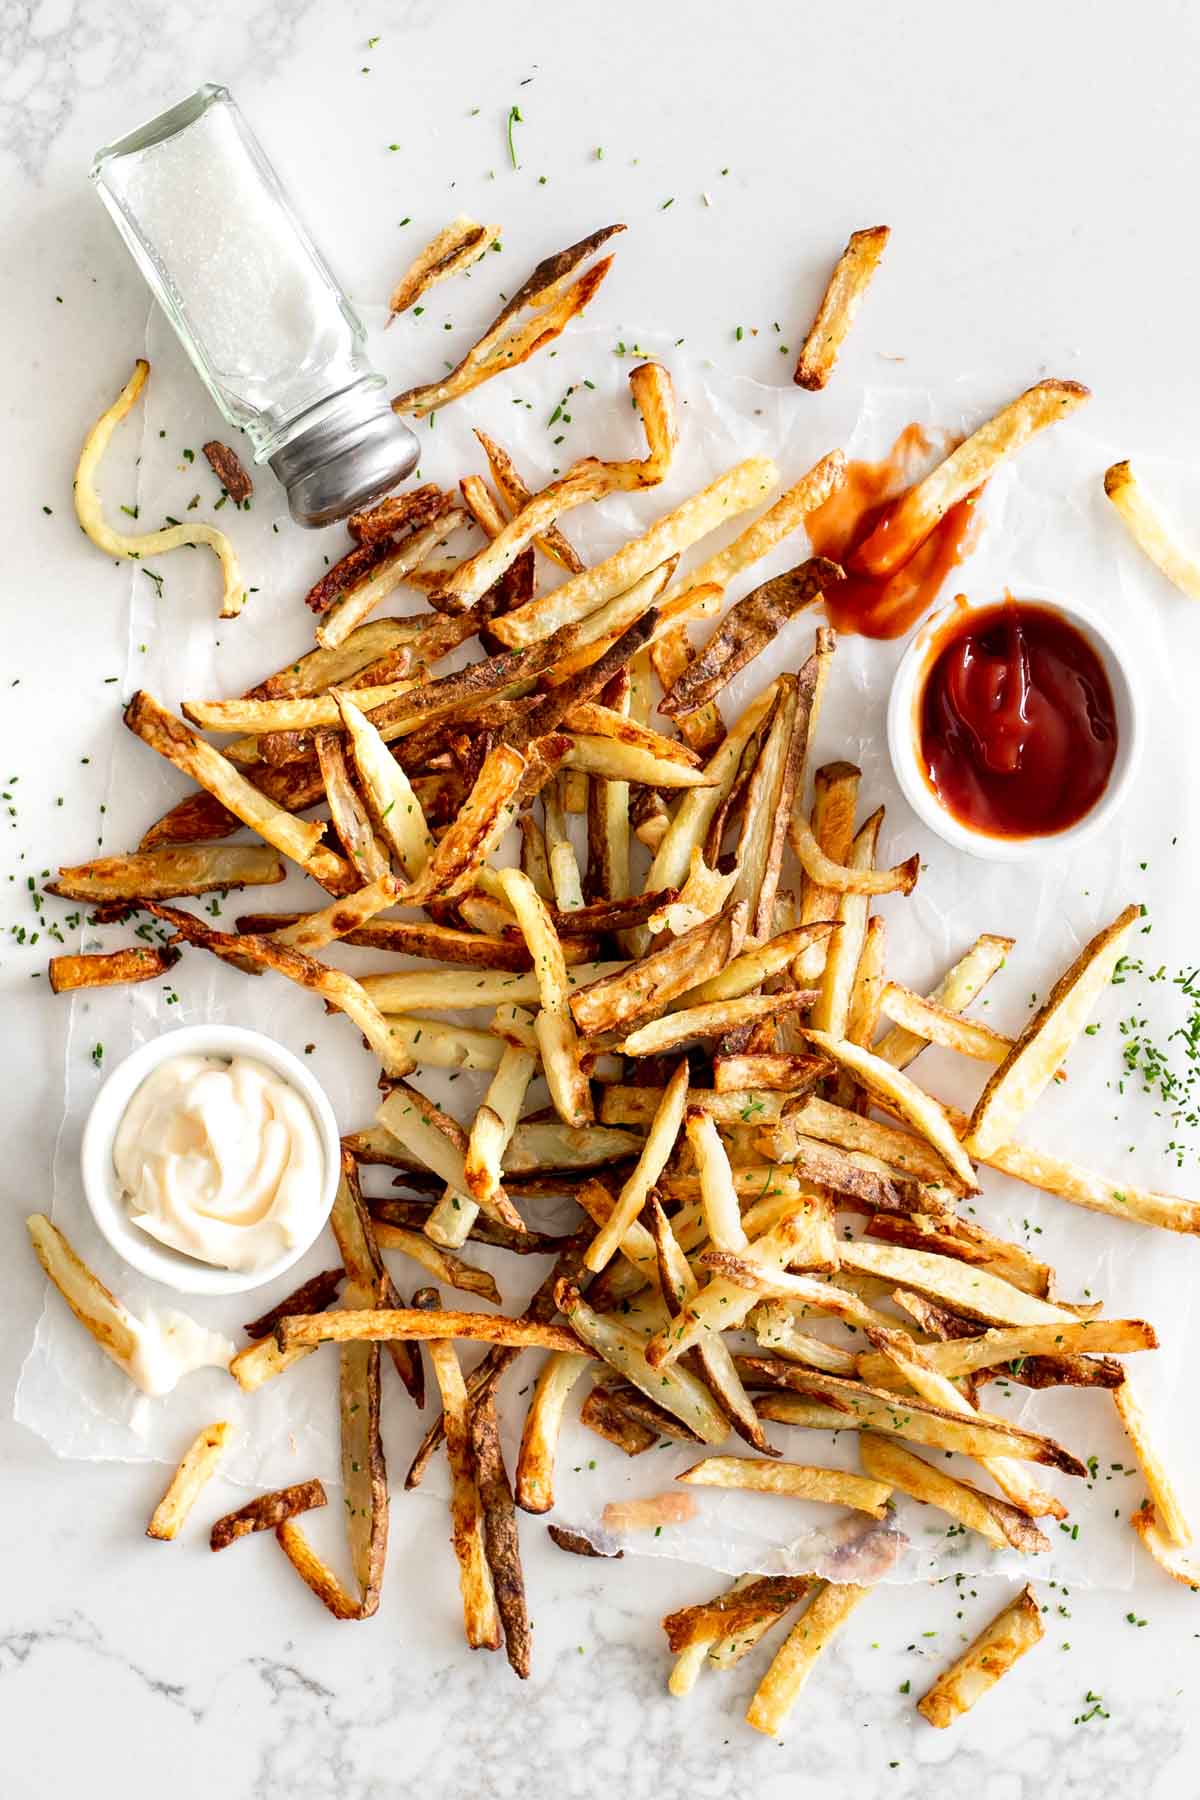 french fries on parchment paper with salt, ketchup and mayonnaise.